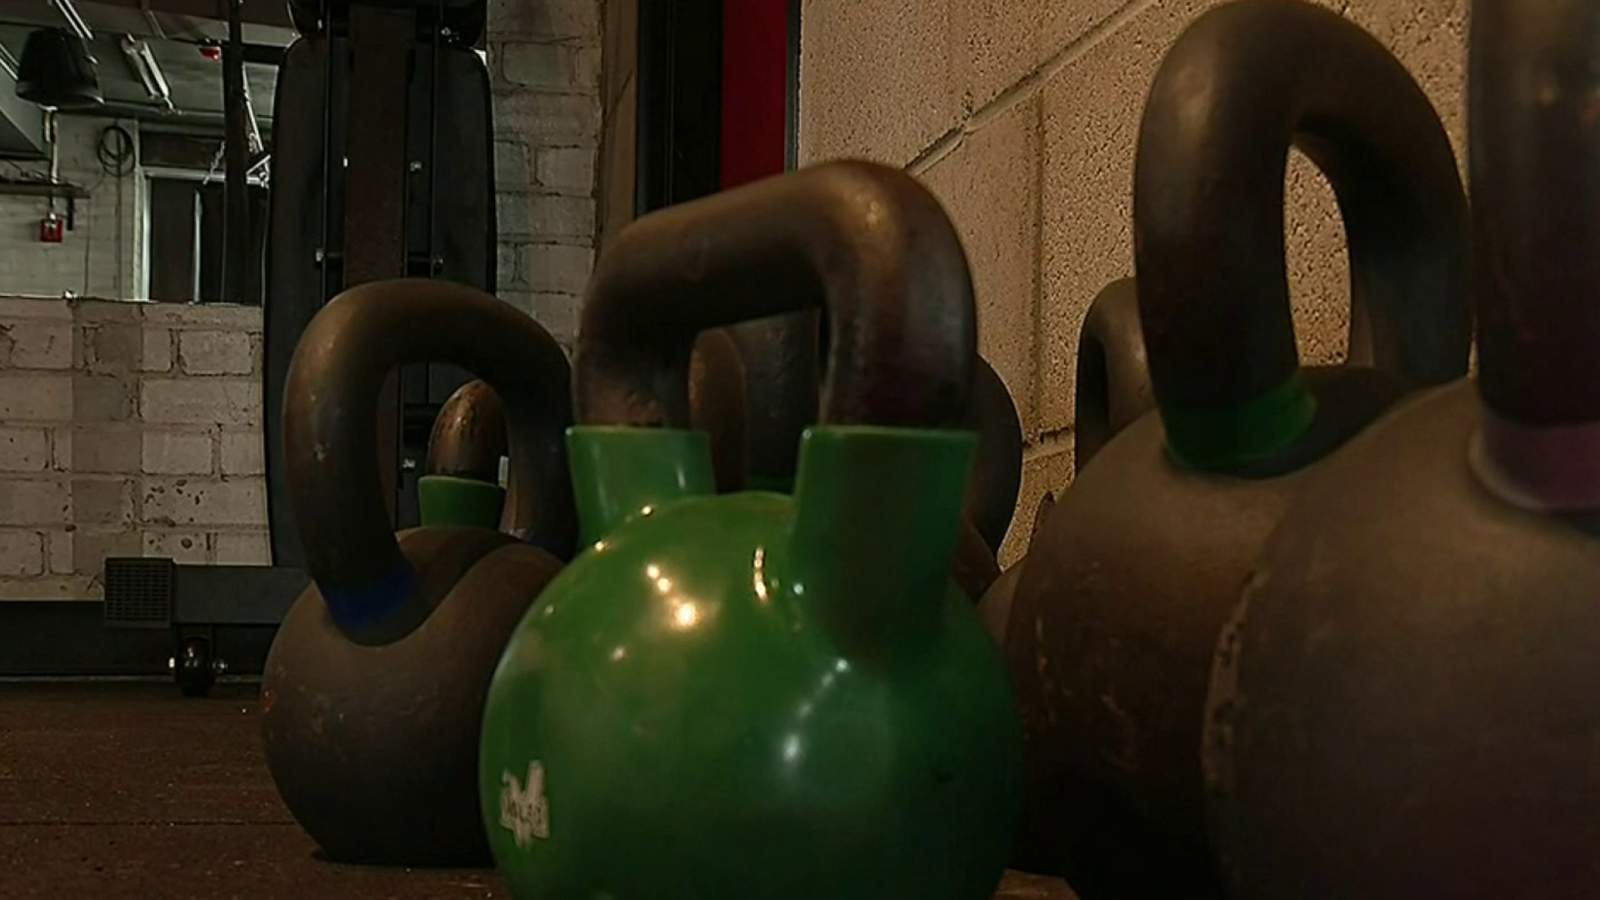 Michigan gyms, fitness centers remain closed